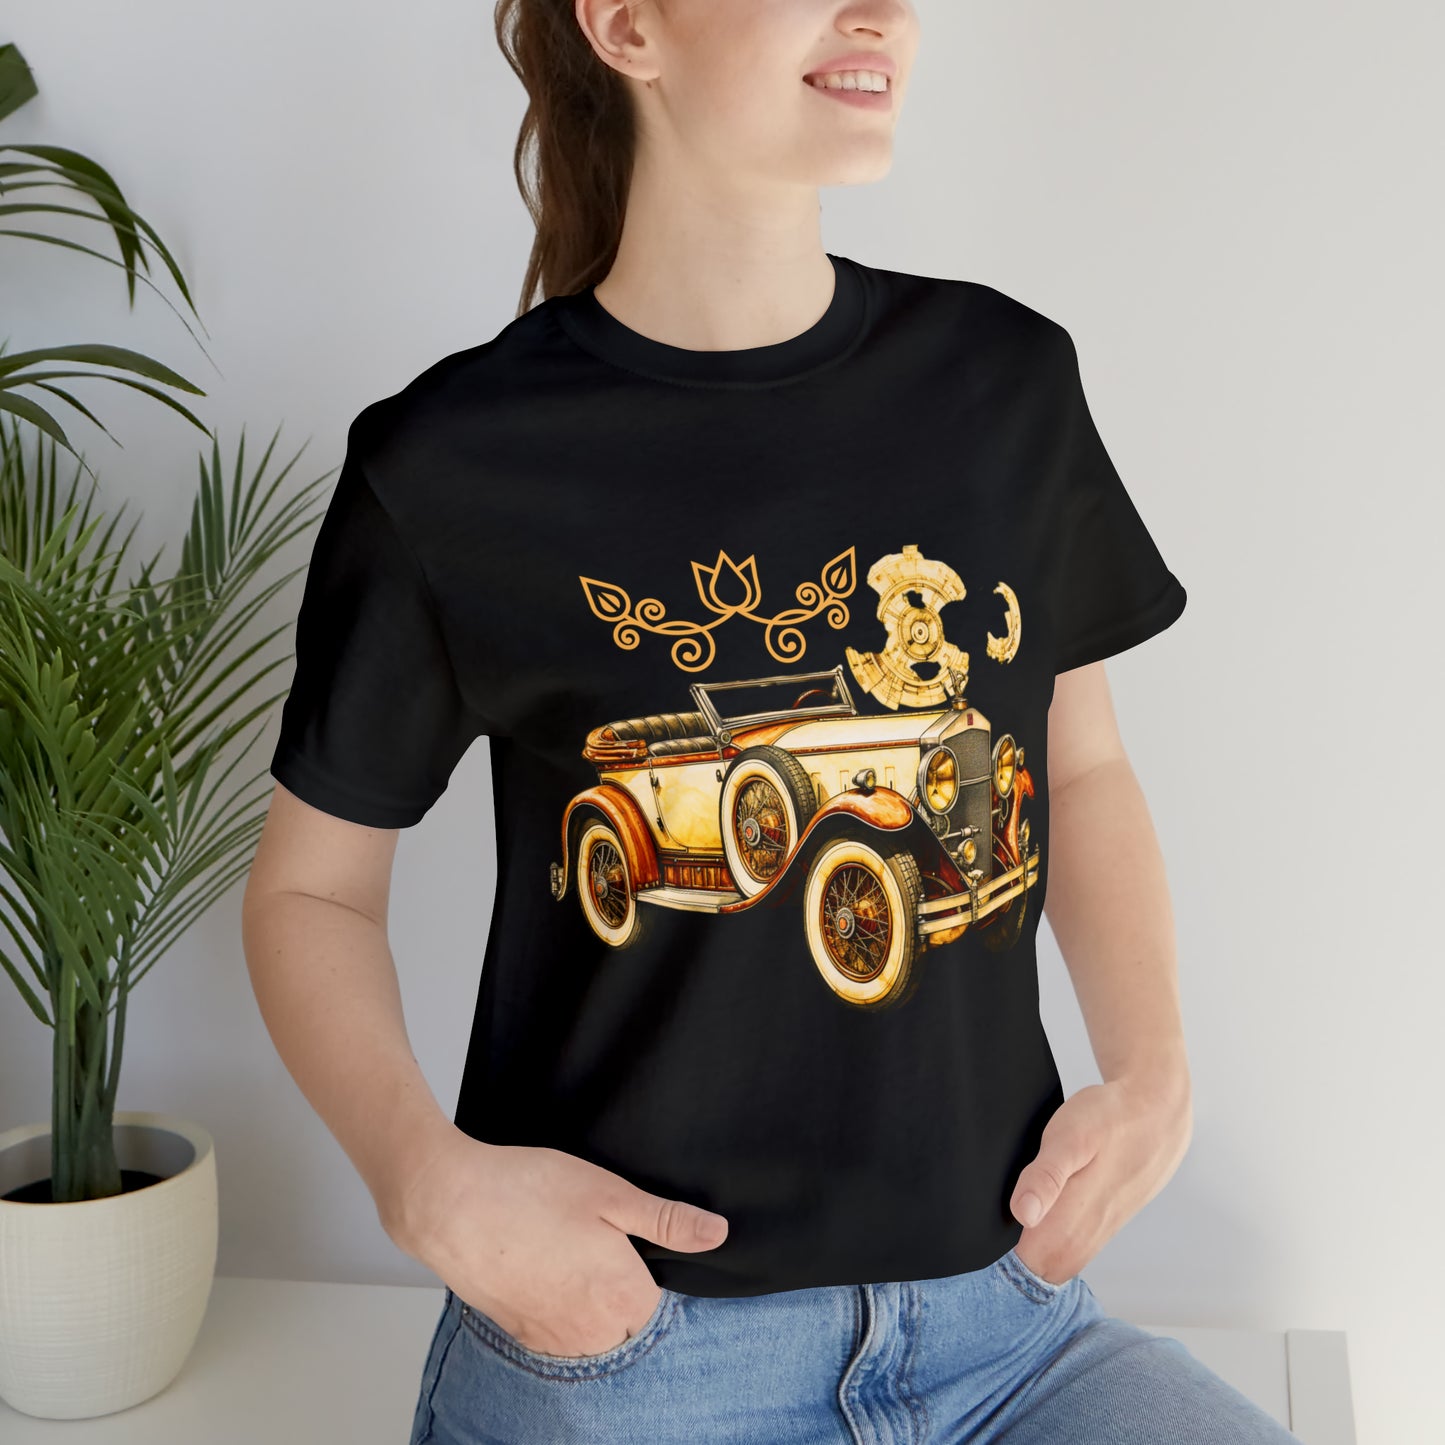 Vintage Car Enthusiast T-Shirt - Classic Wheels and Timeless Appeal for Automotive Enthusiast T-Shirt   